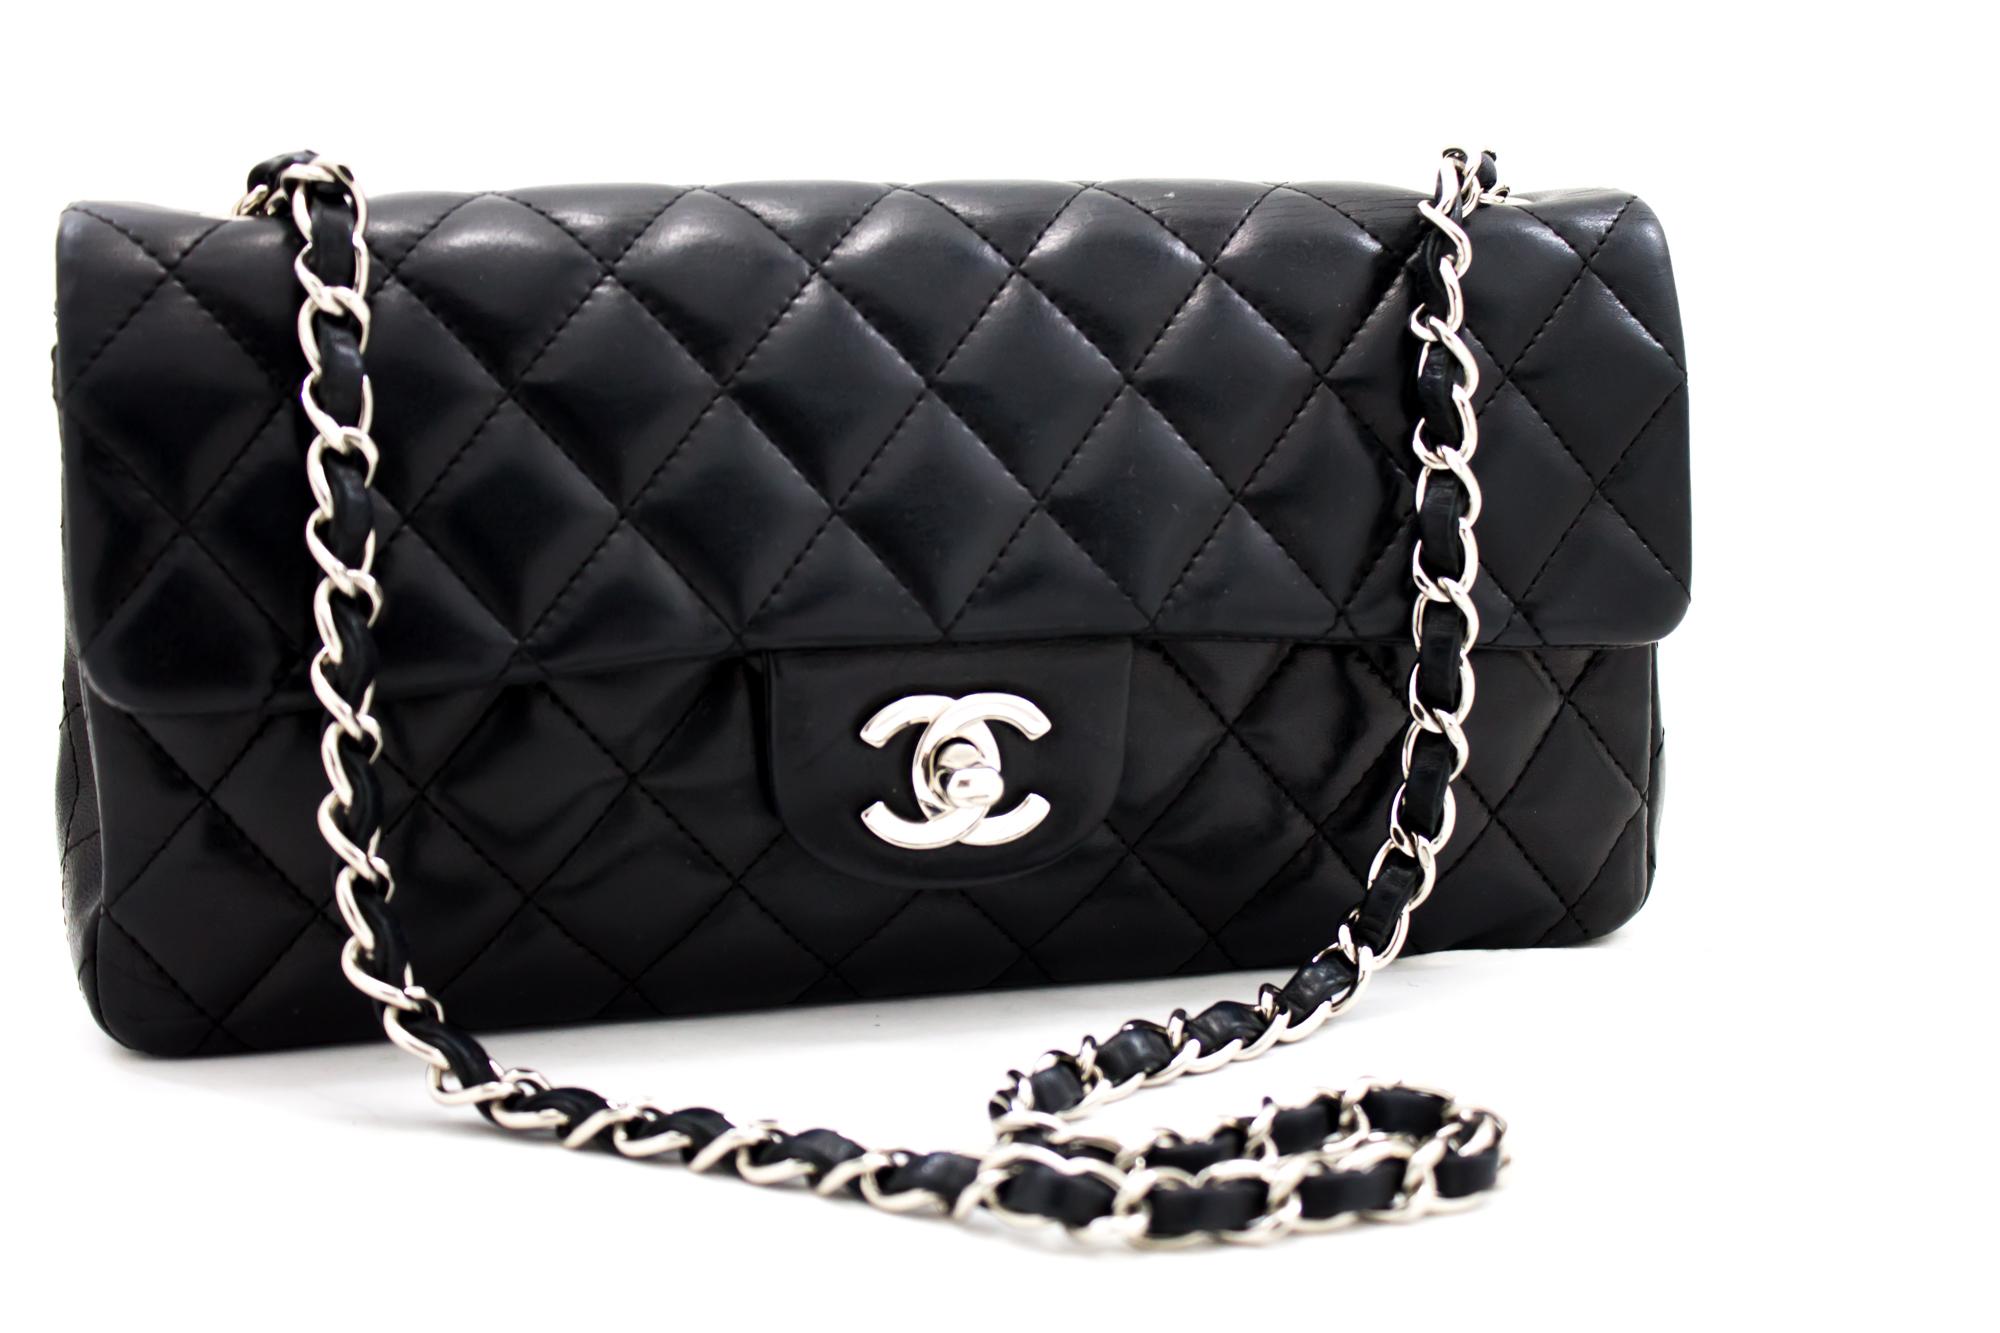 An authentic CHANEL Silver Hw Single Flap Chain Shoulder Bag Black Quilted Lam. The color is Black. The outside material is Leather. The pattern is Solid. This item is Contemporary. The year of manufacture would be 2007.
Conditions & Ratings
Outside